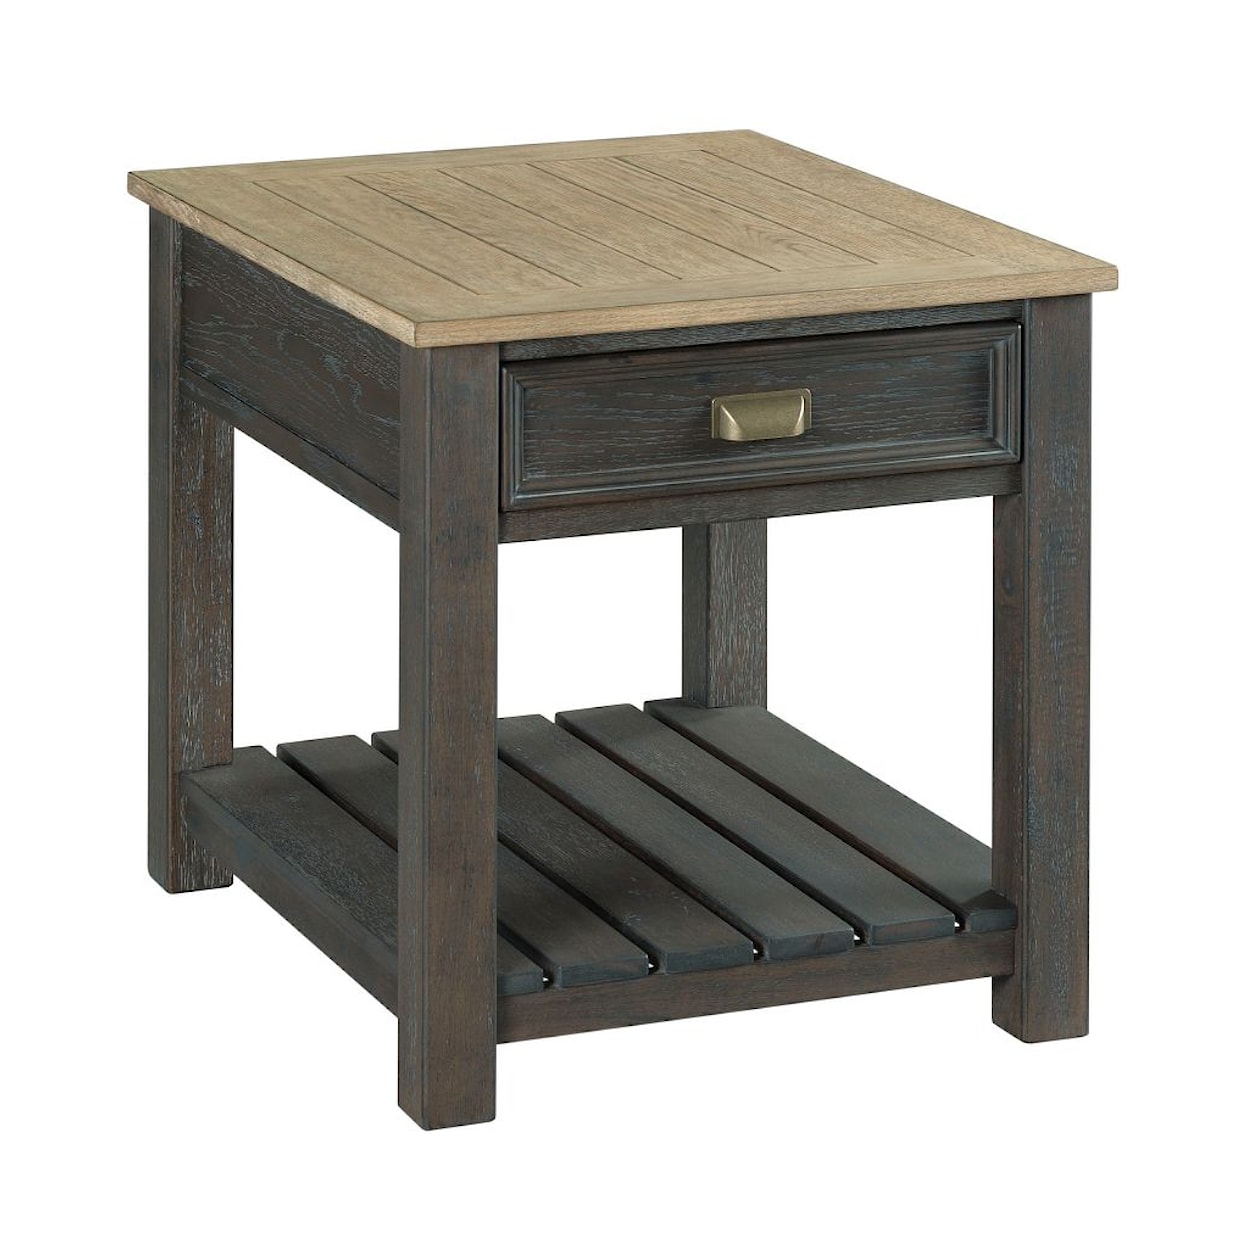 Hammary Lyle Creek End Table